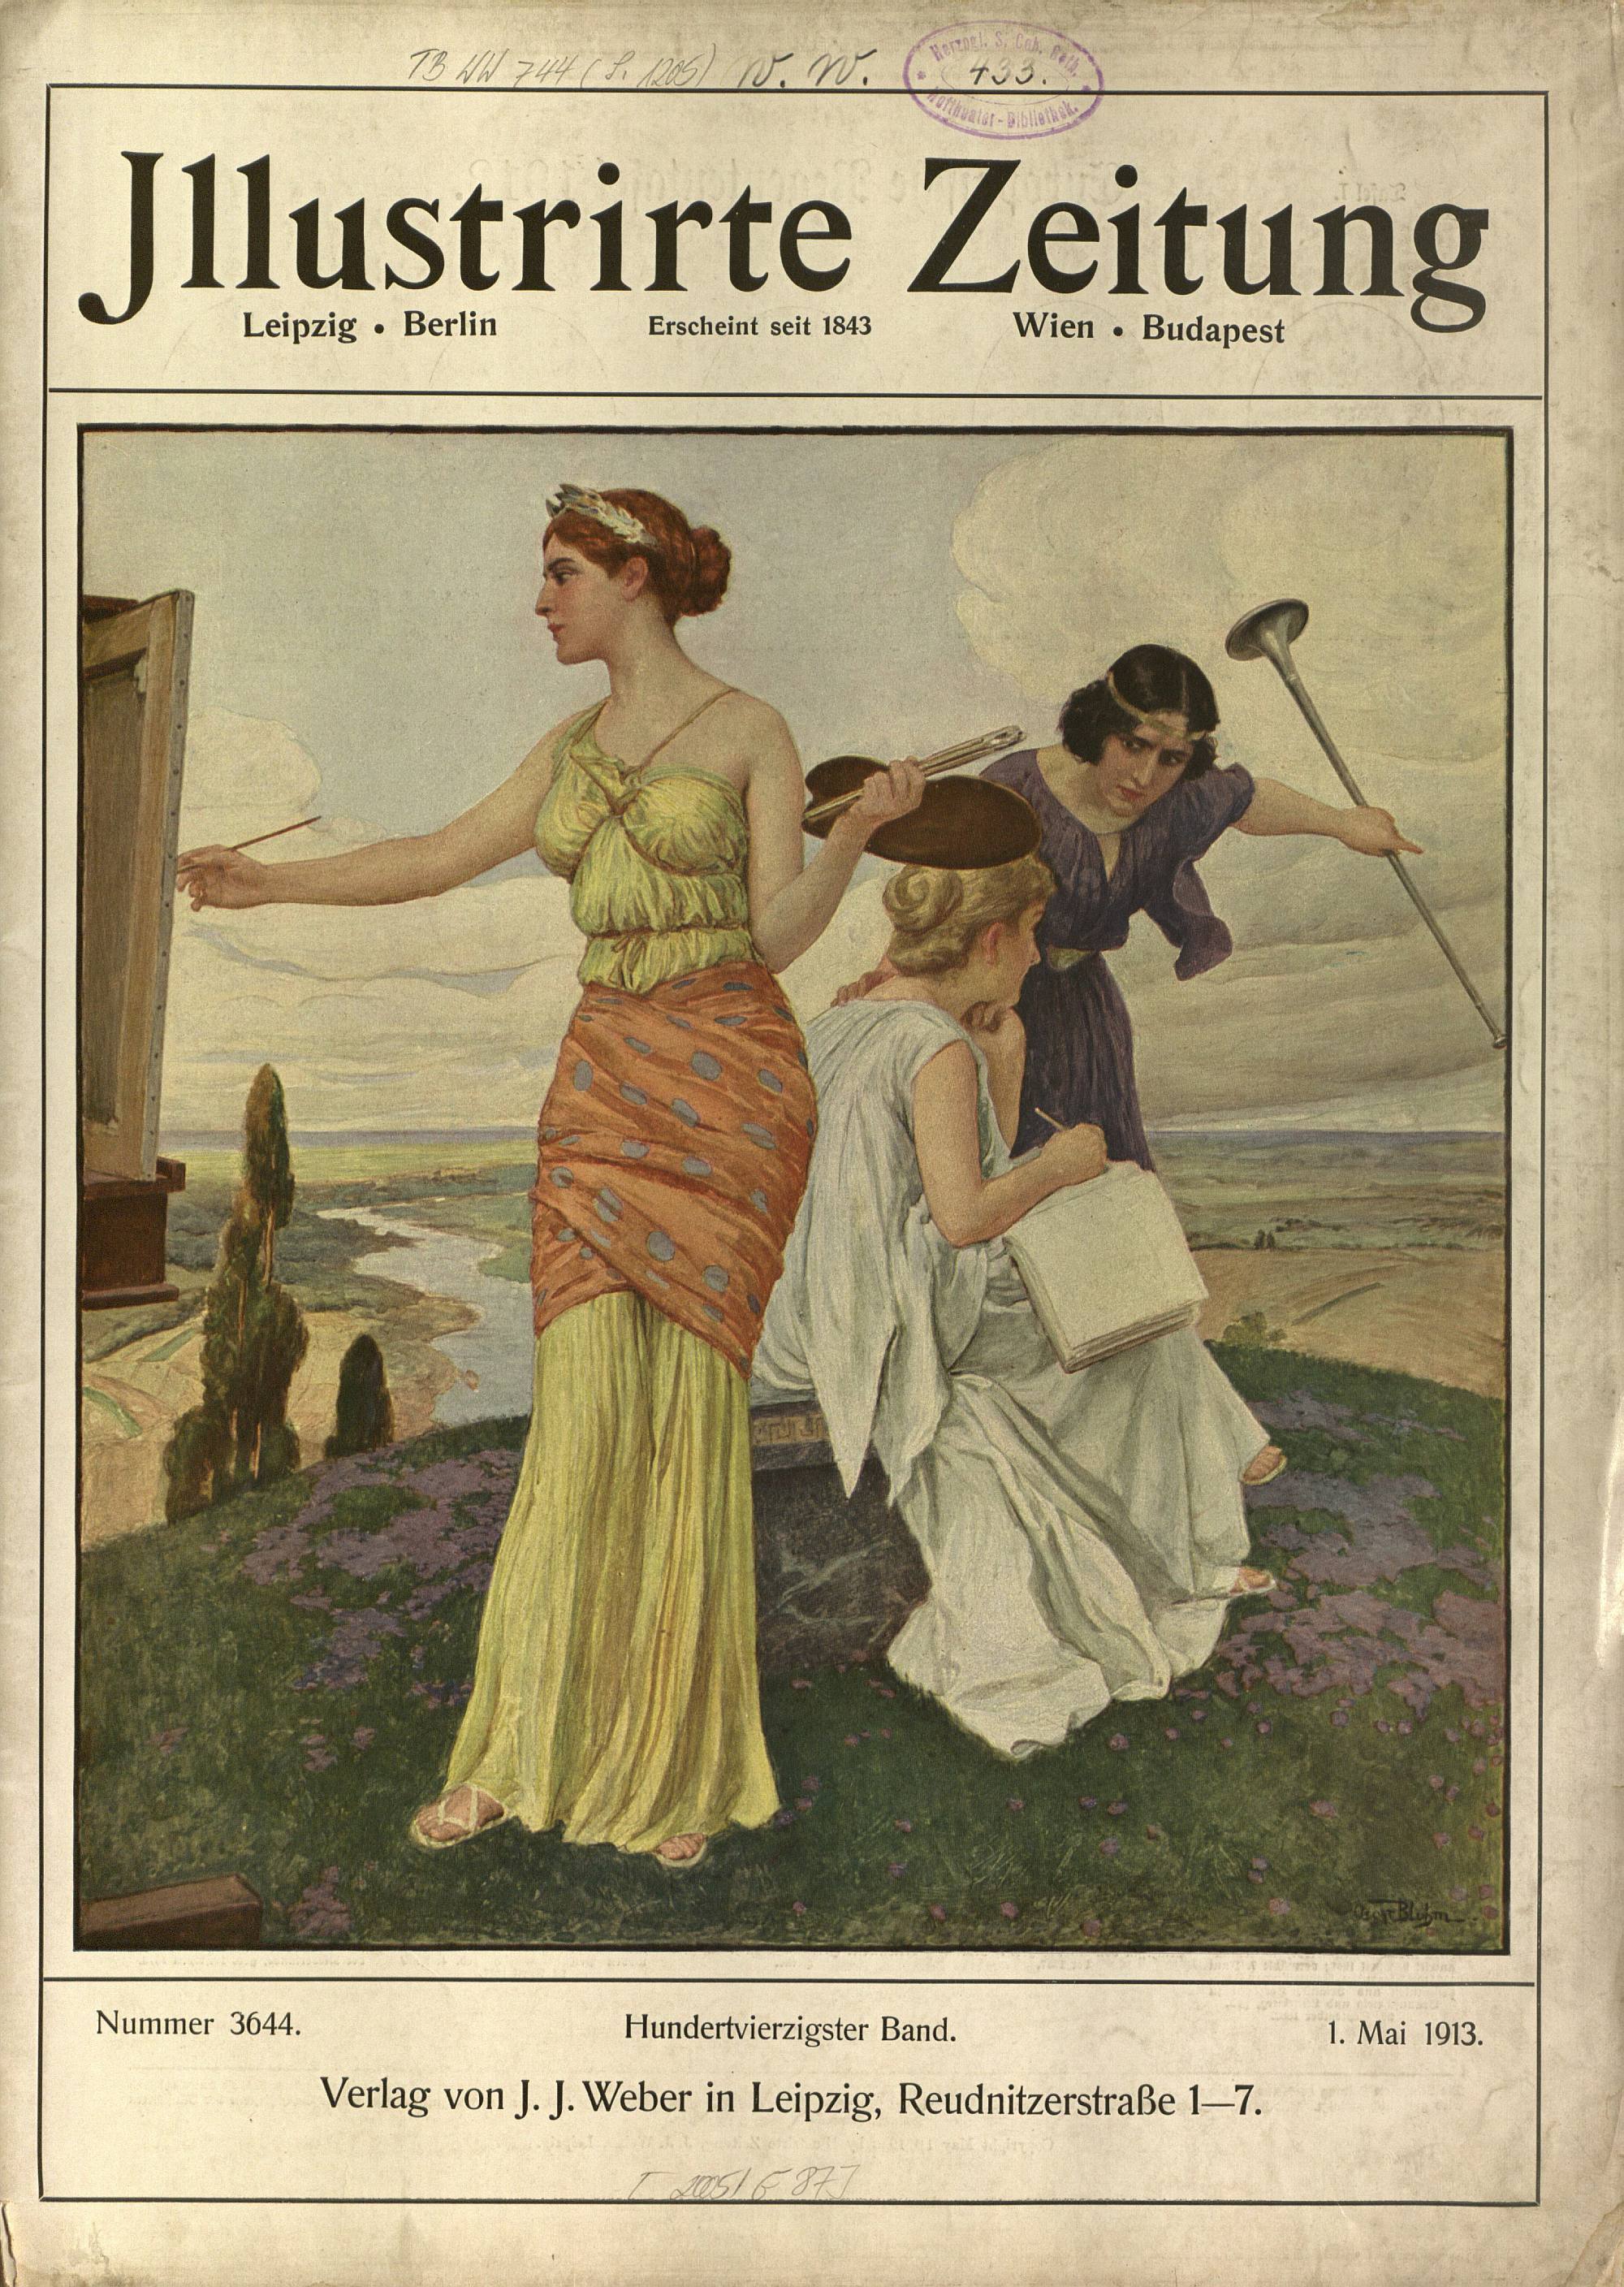 Illustrierte Zeitung, Vol. 140, Nr. 3644 (1 May 1913) Cover